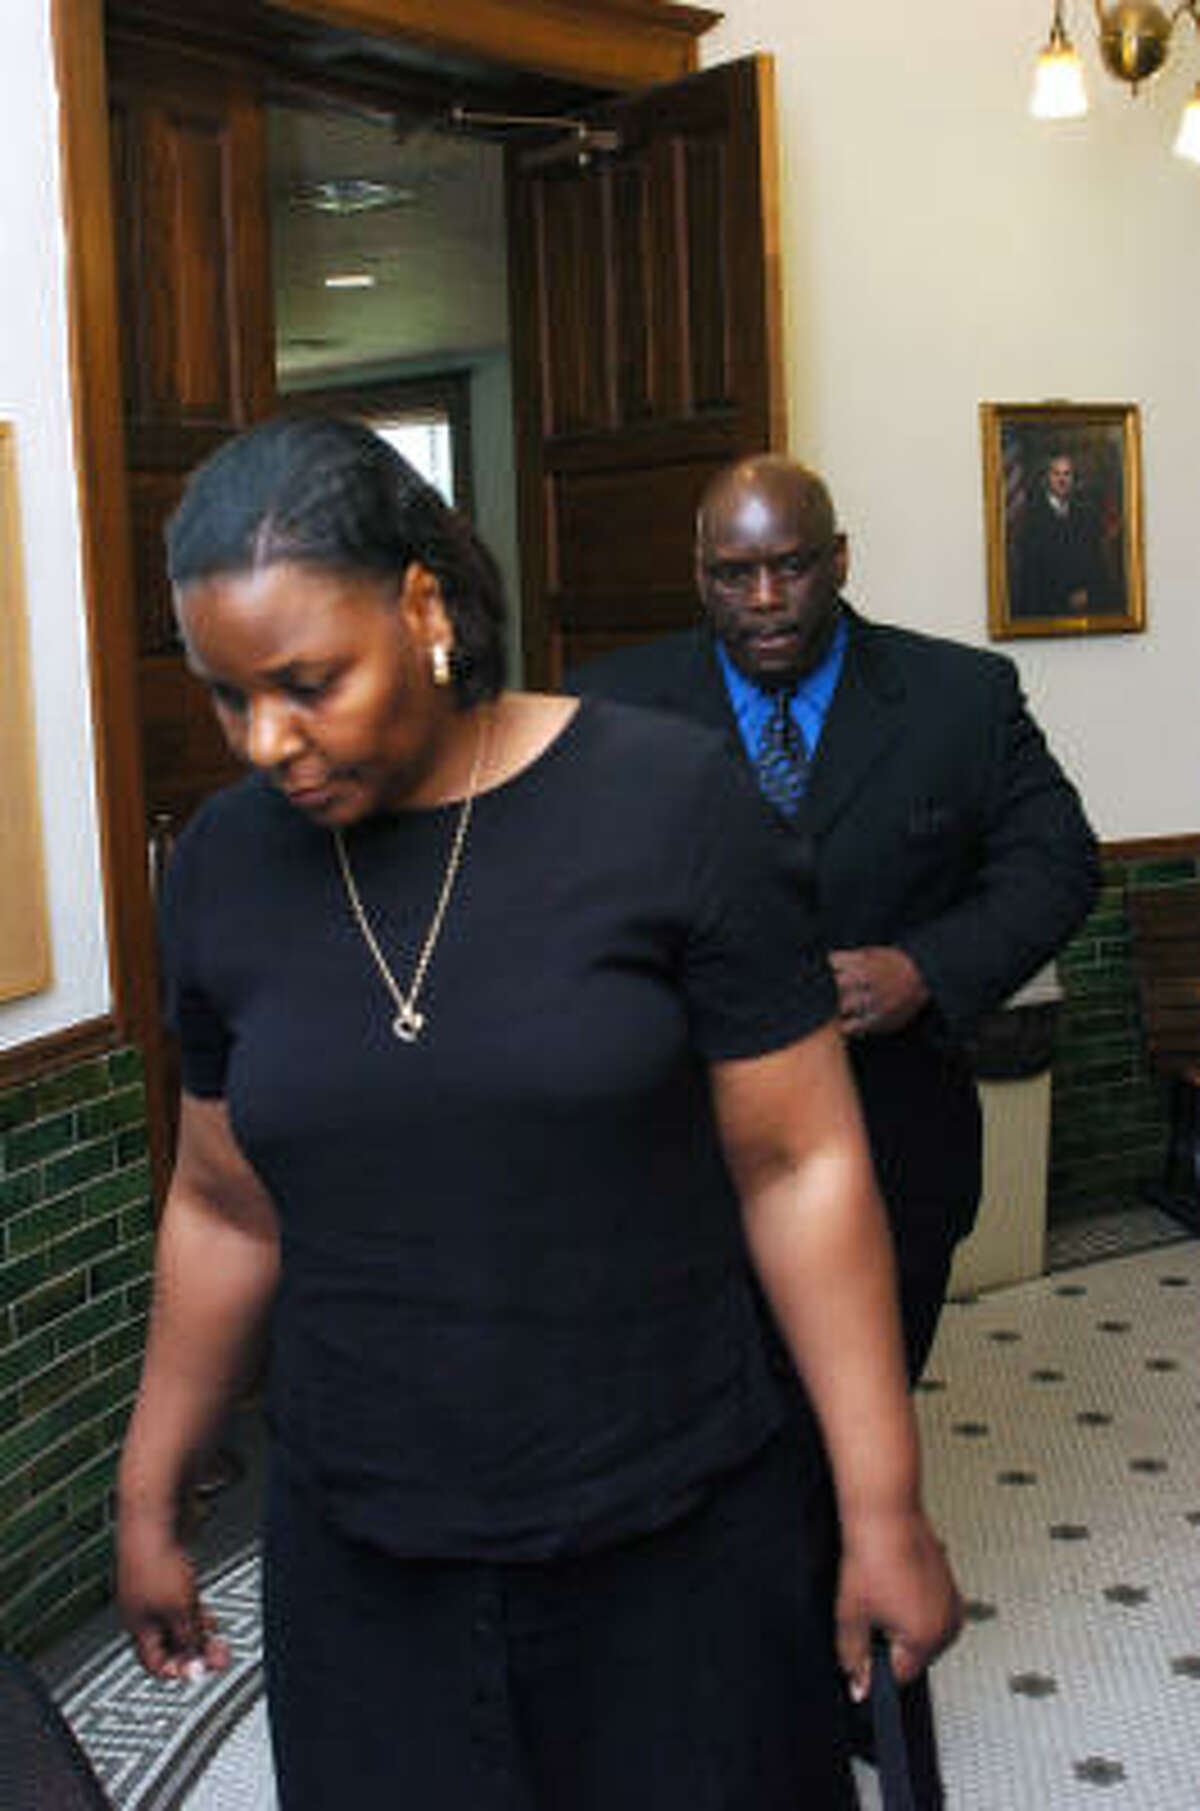 Barbara and Tommy Baldwin exit the courtroom after receiving a guilty verdict Tuesday in Fort Bend County.